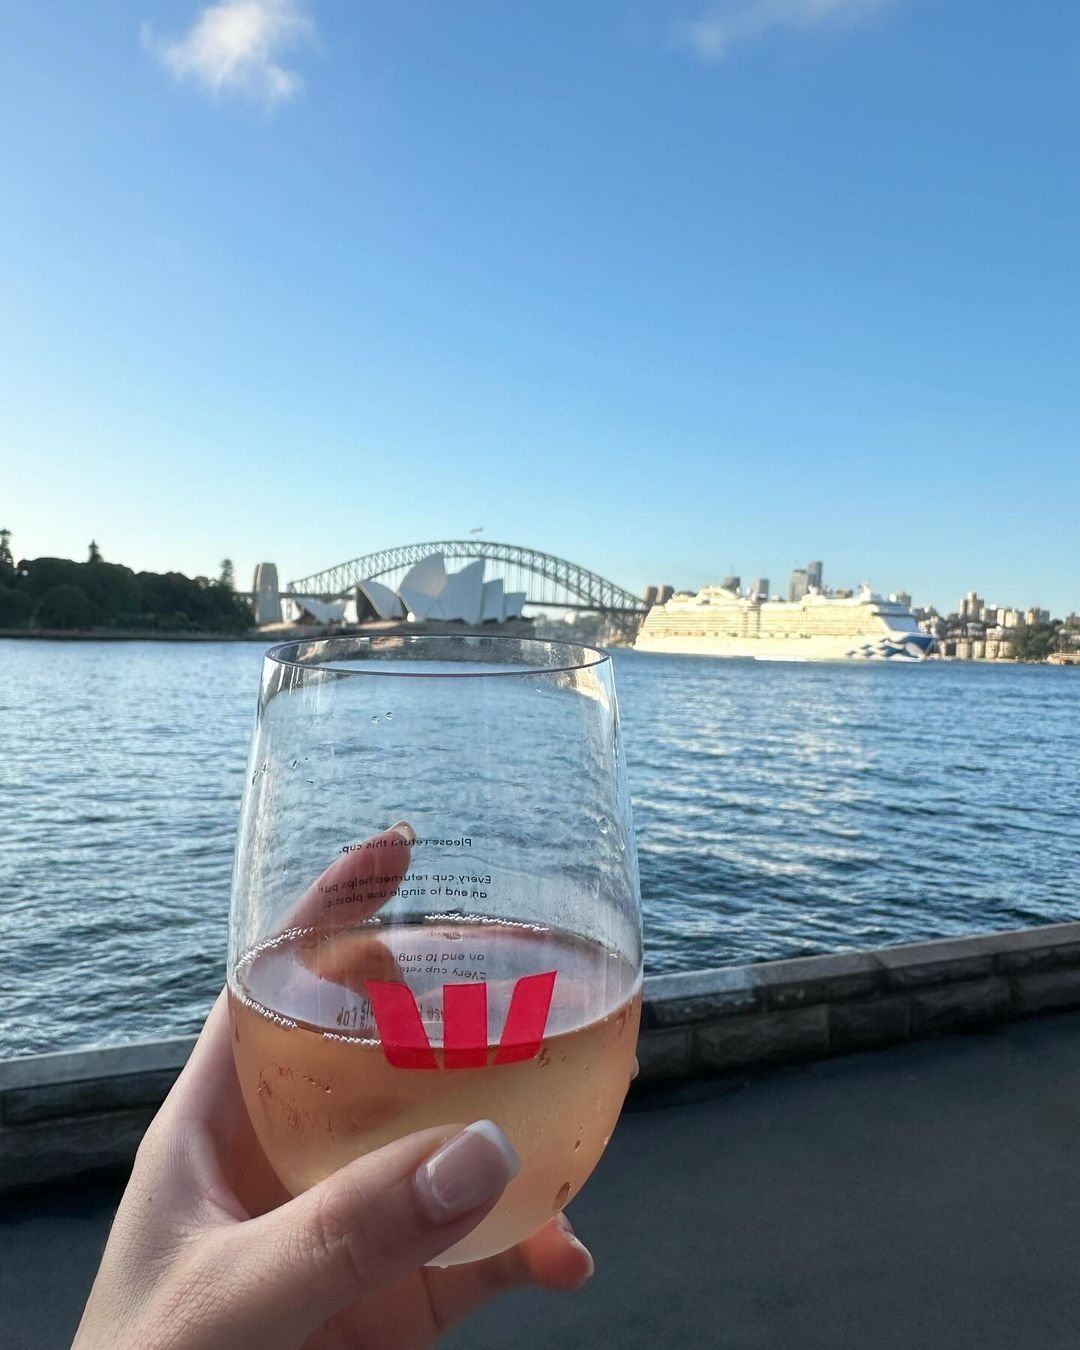 Make a lasting impression at your next event with our custom event cups. Your logo, your style!

#bettercup #bettercupau #bettercupnz

#cupsforchange #sustainableliving #refillnotlandfill #sustainableevents #reusablecups #ecofriendly #environmentally